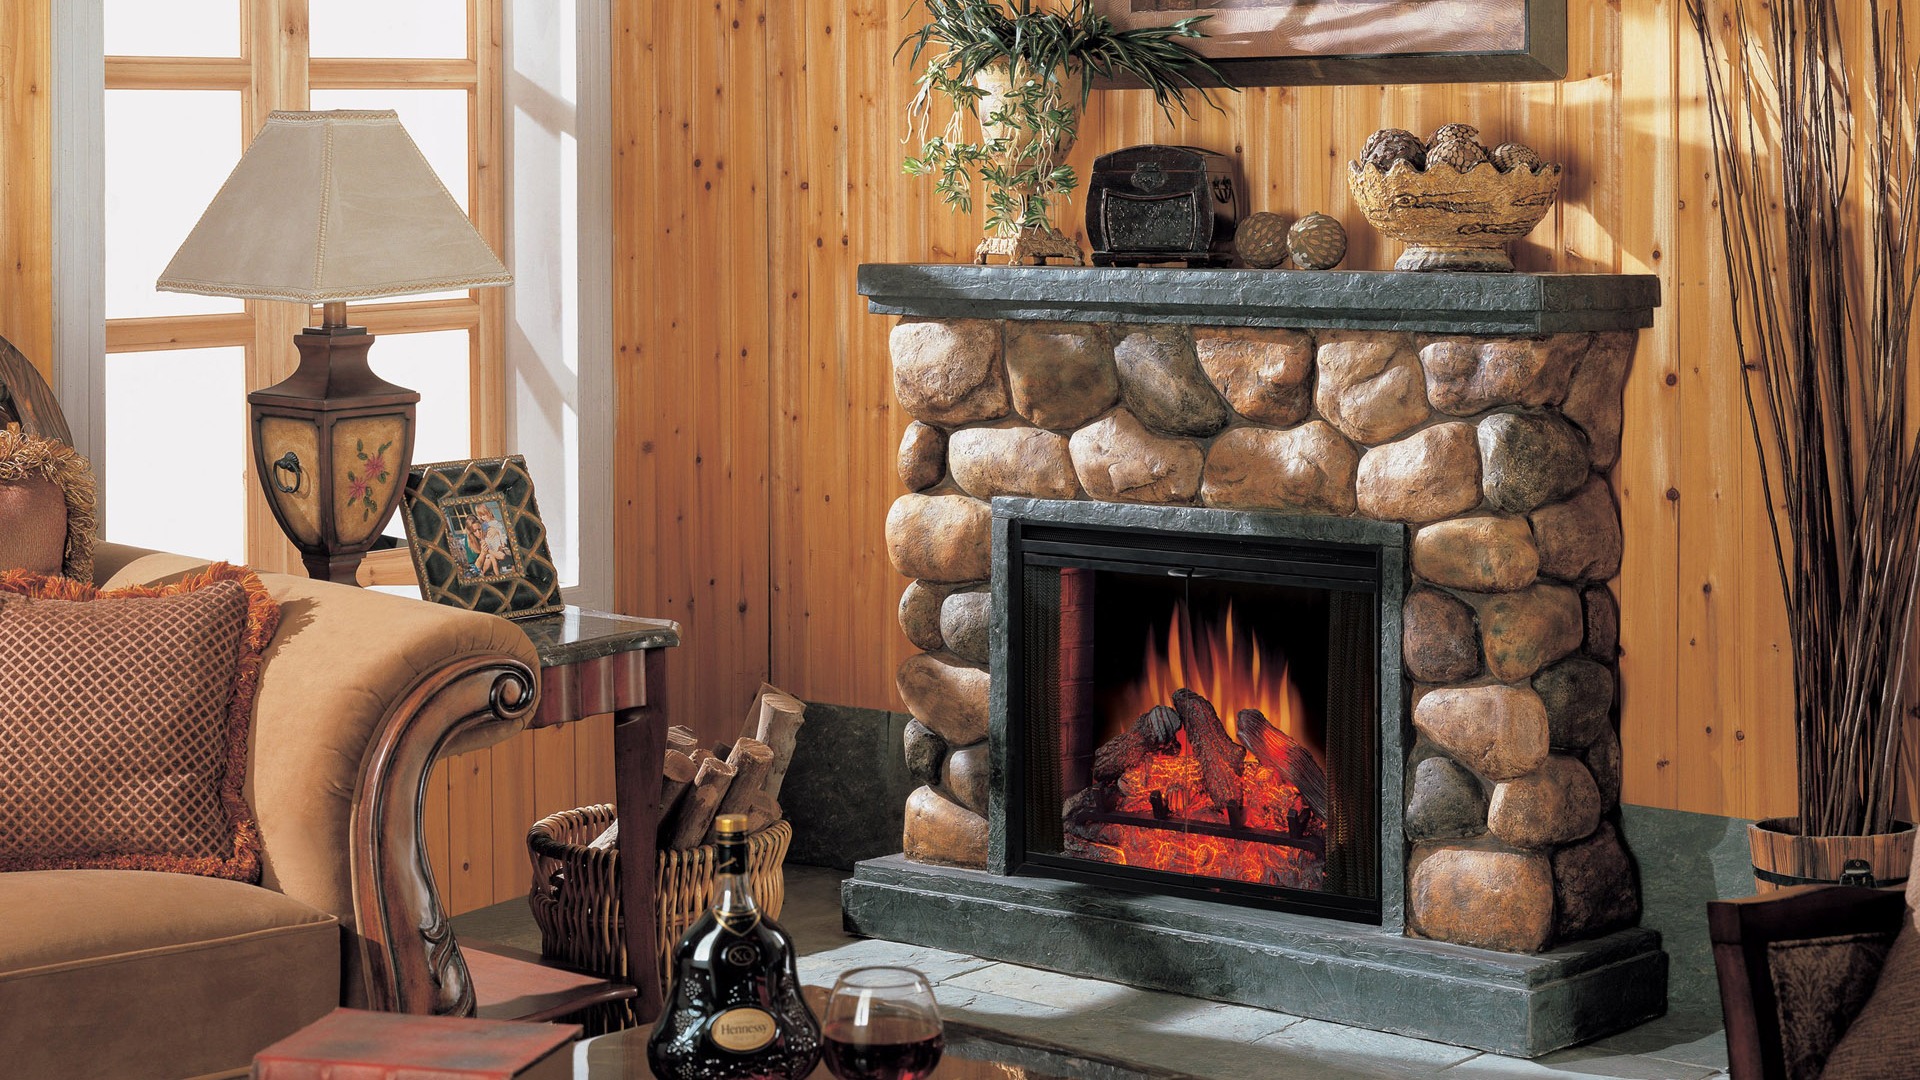 Western-style family fireplace wallpaper (1) #2 - 1920x1080